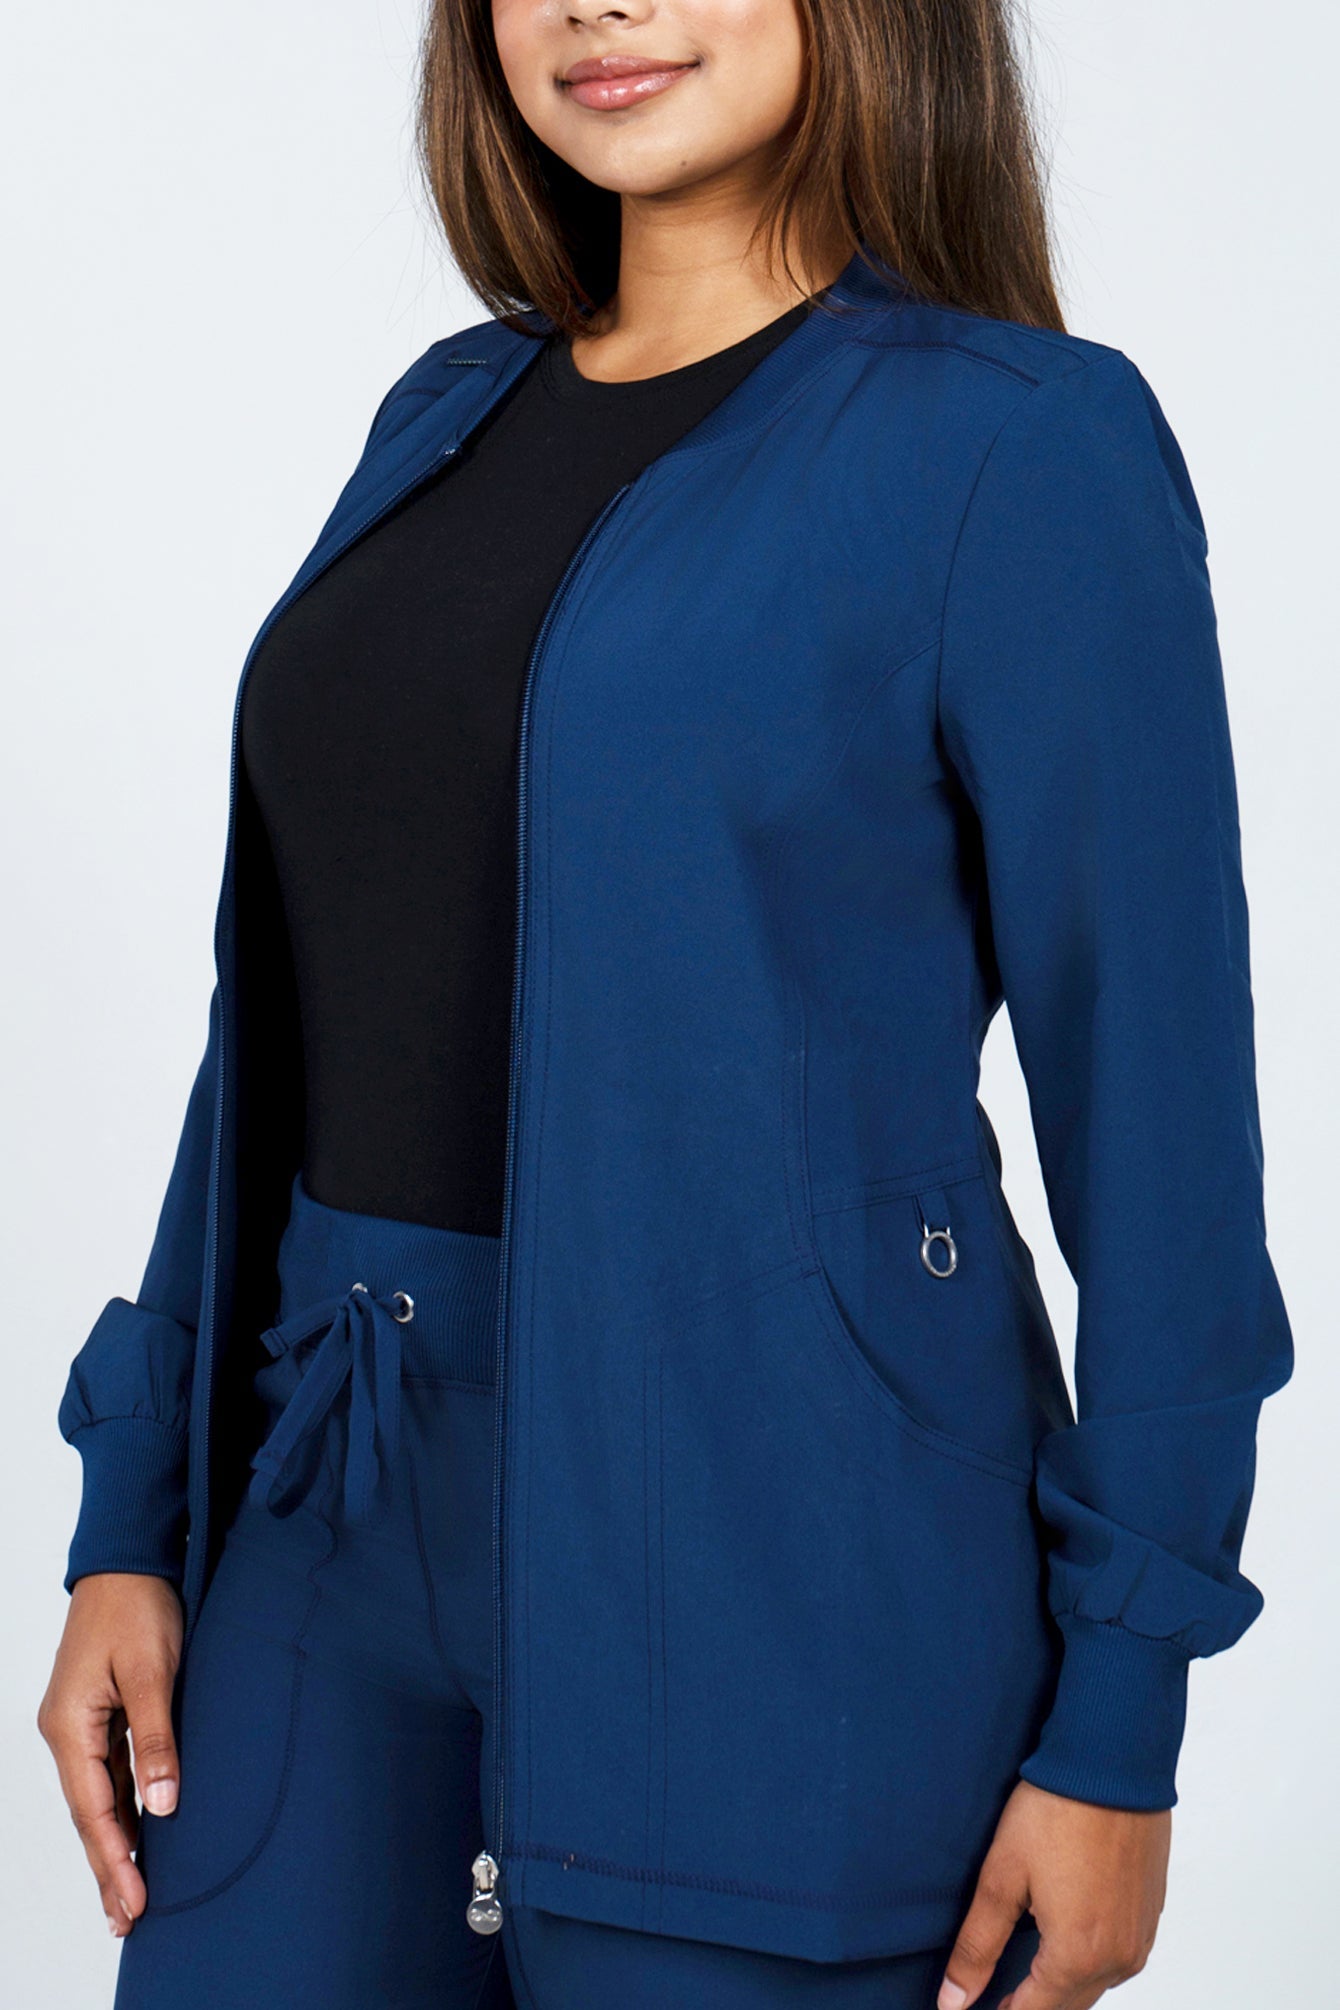 Healthcare worker wearing Rhino navy scrub jacket and pants with black underscrub top in plus size